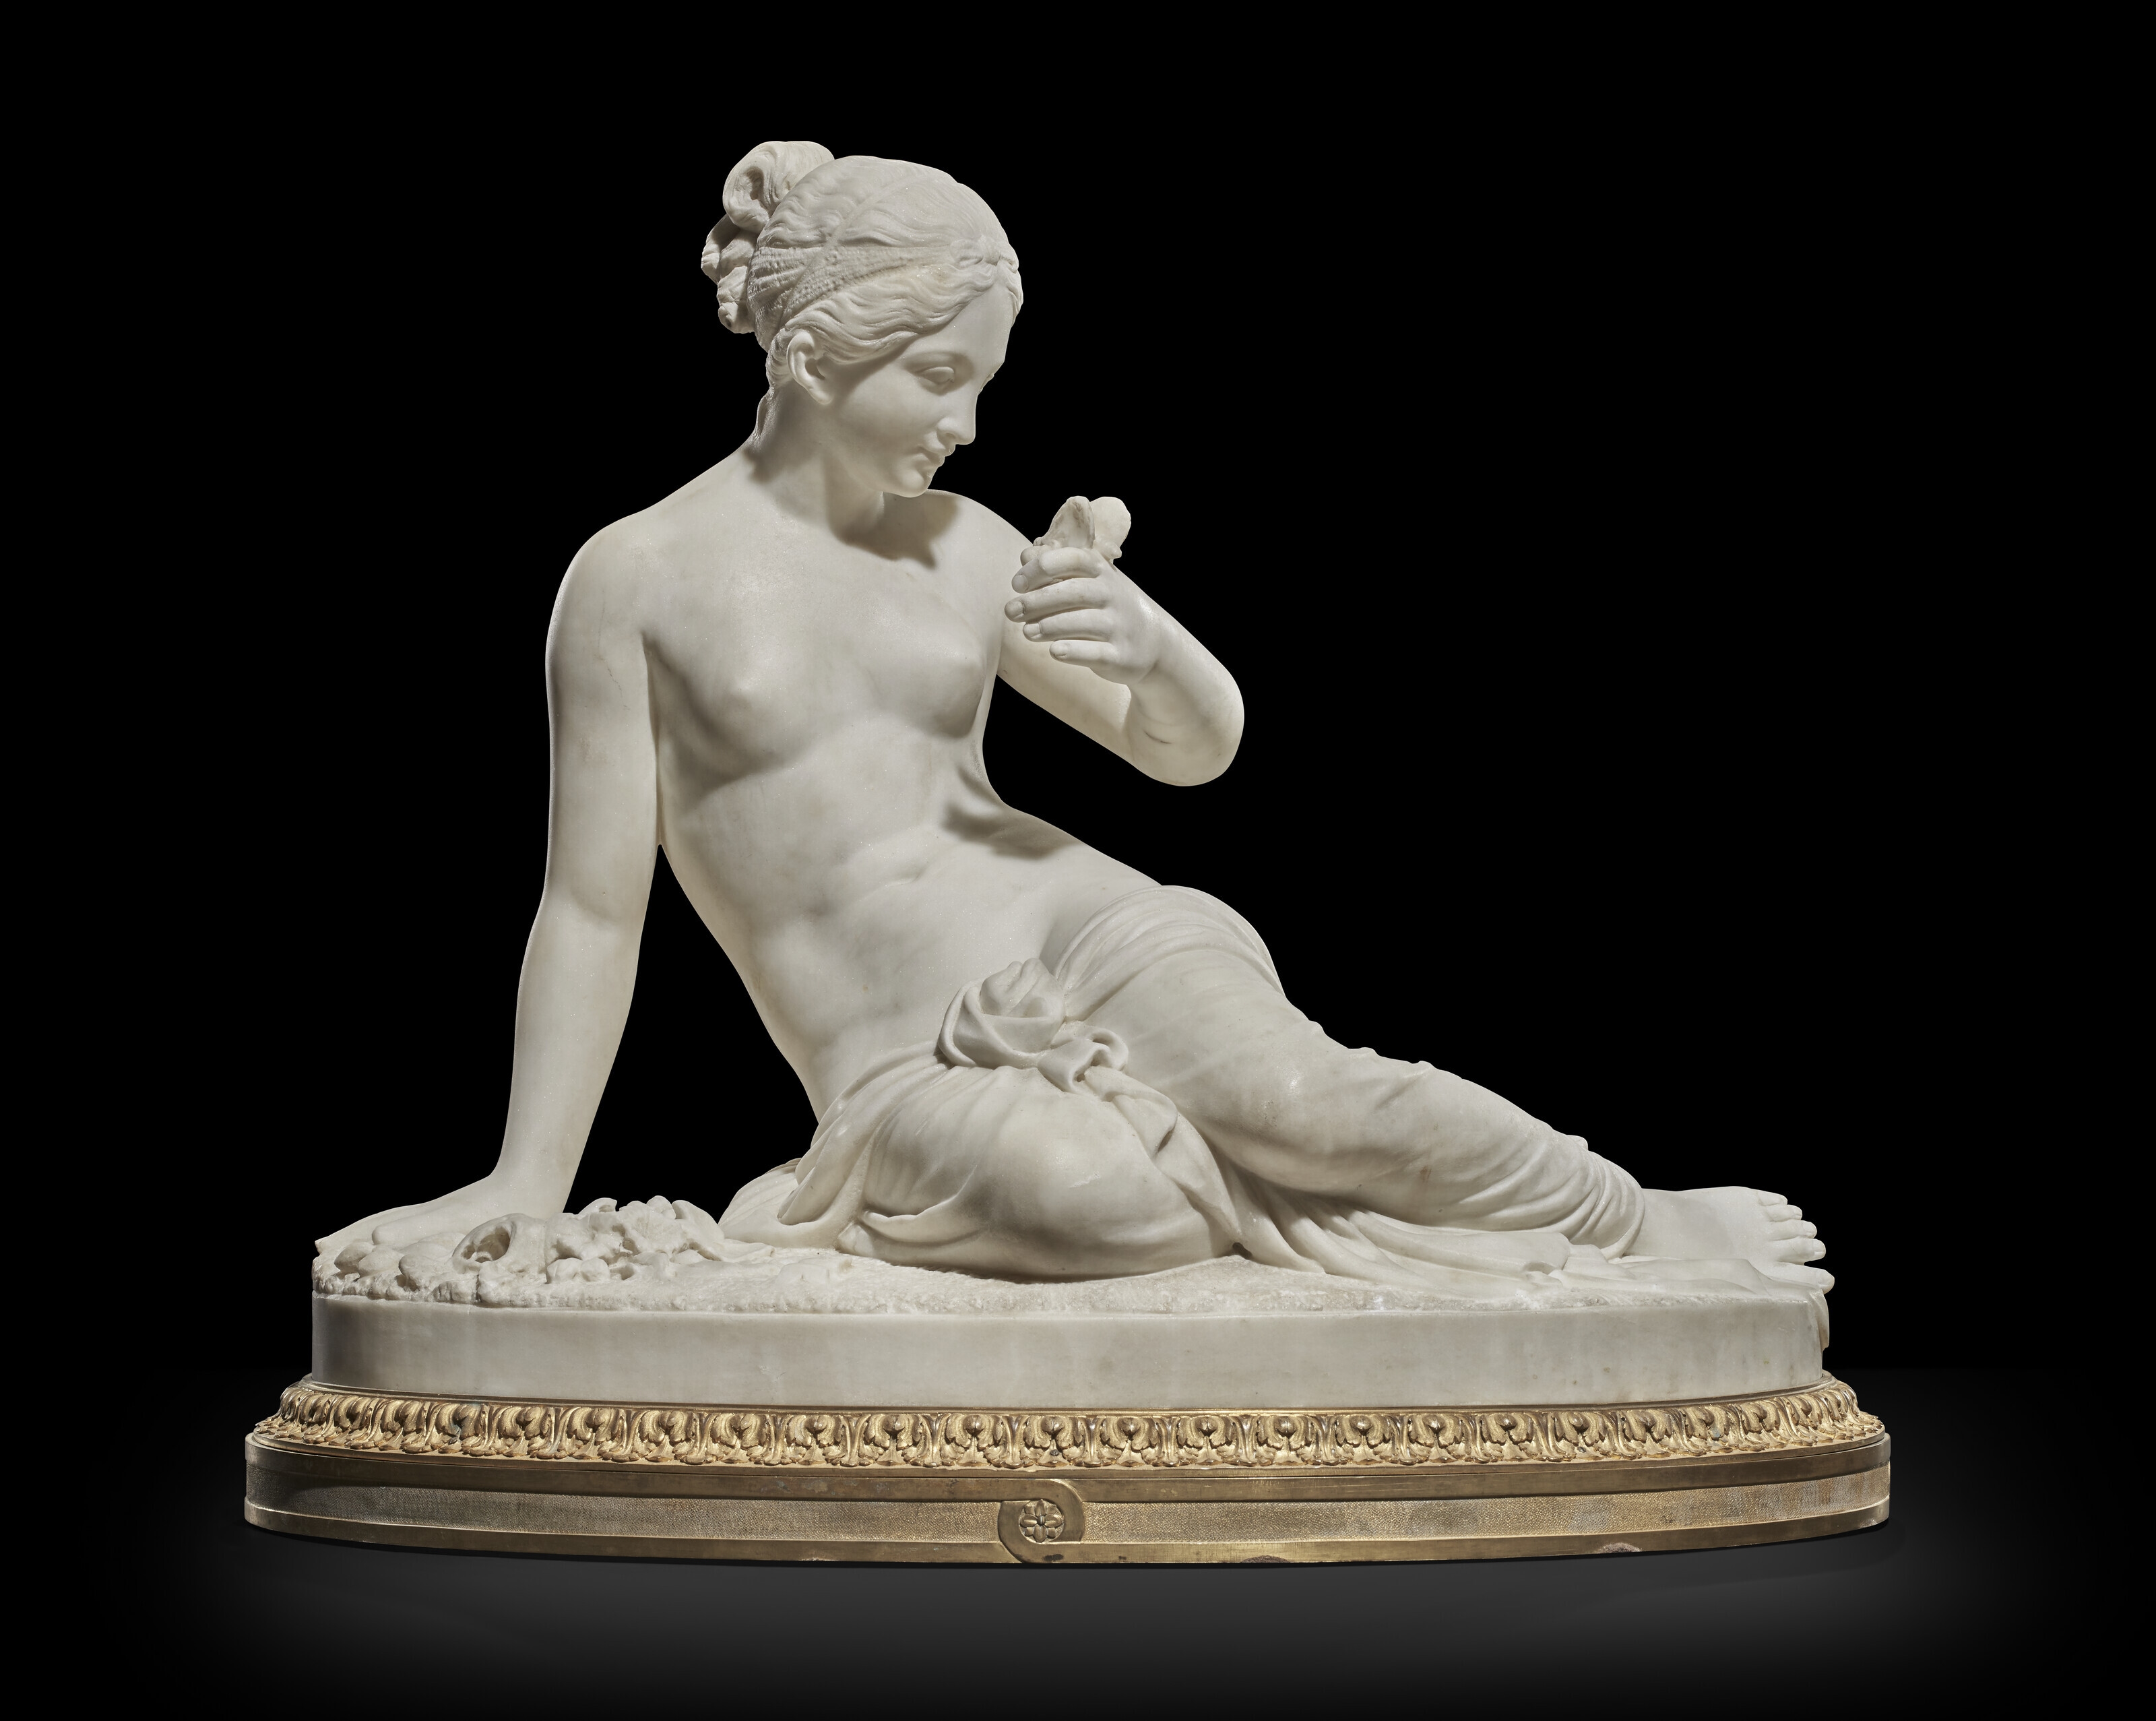 Artwork by Pietro Tenerani, A WHITE MARBLE OF PSYCHE ABANDONNED, Made of marble